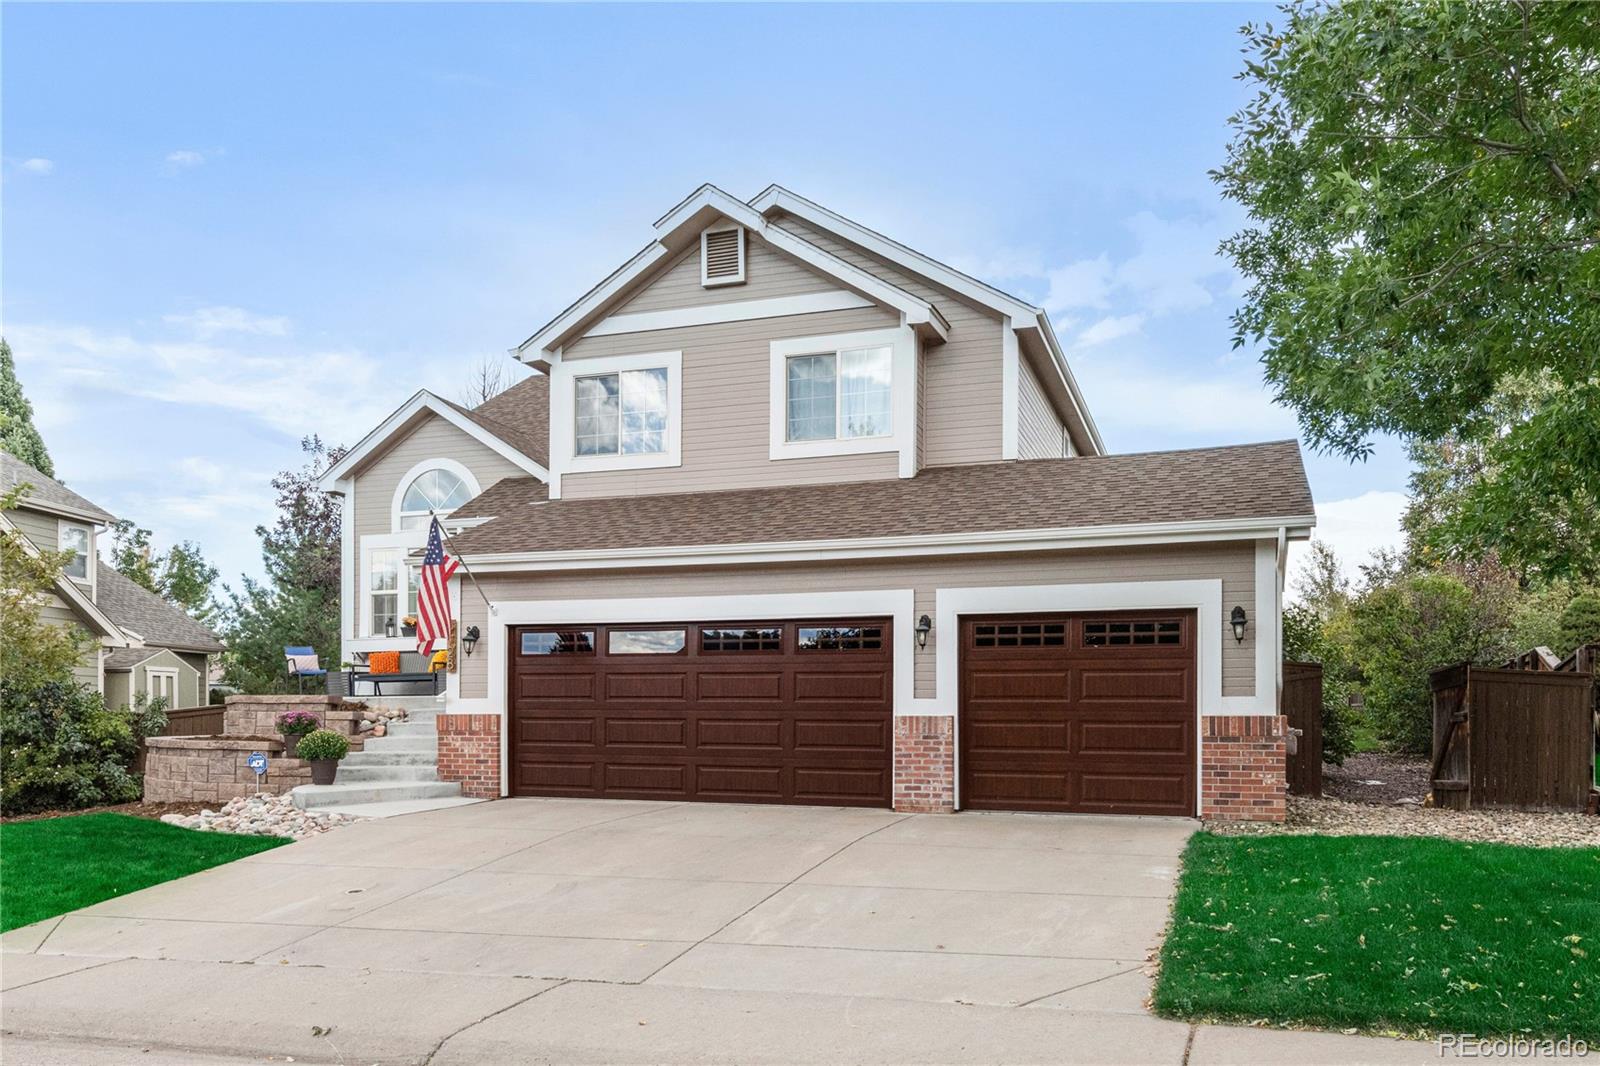 9728  westbury circle, Highlands Ranch sold home. Closed on 2024-04-26 for $750,000.